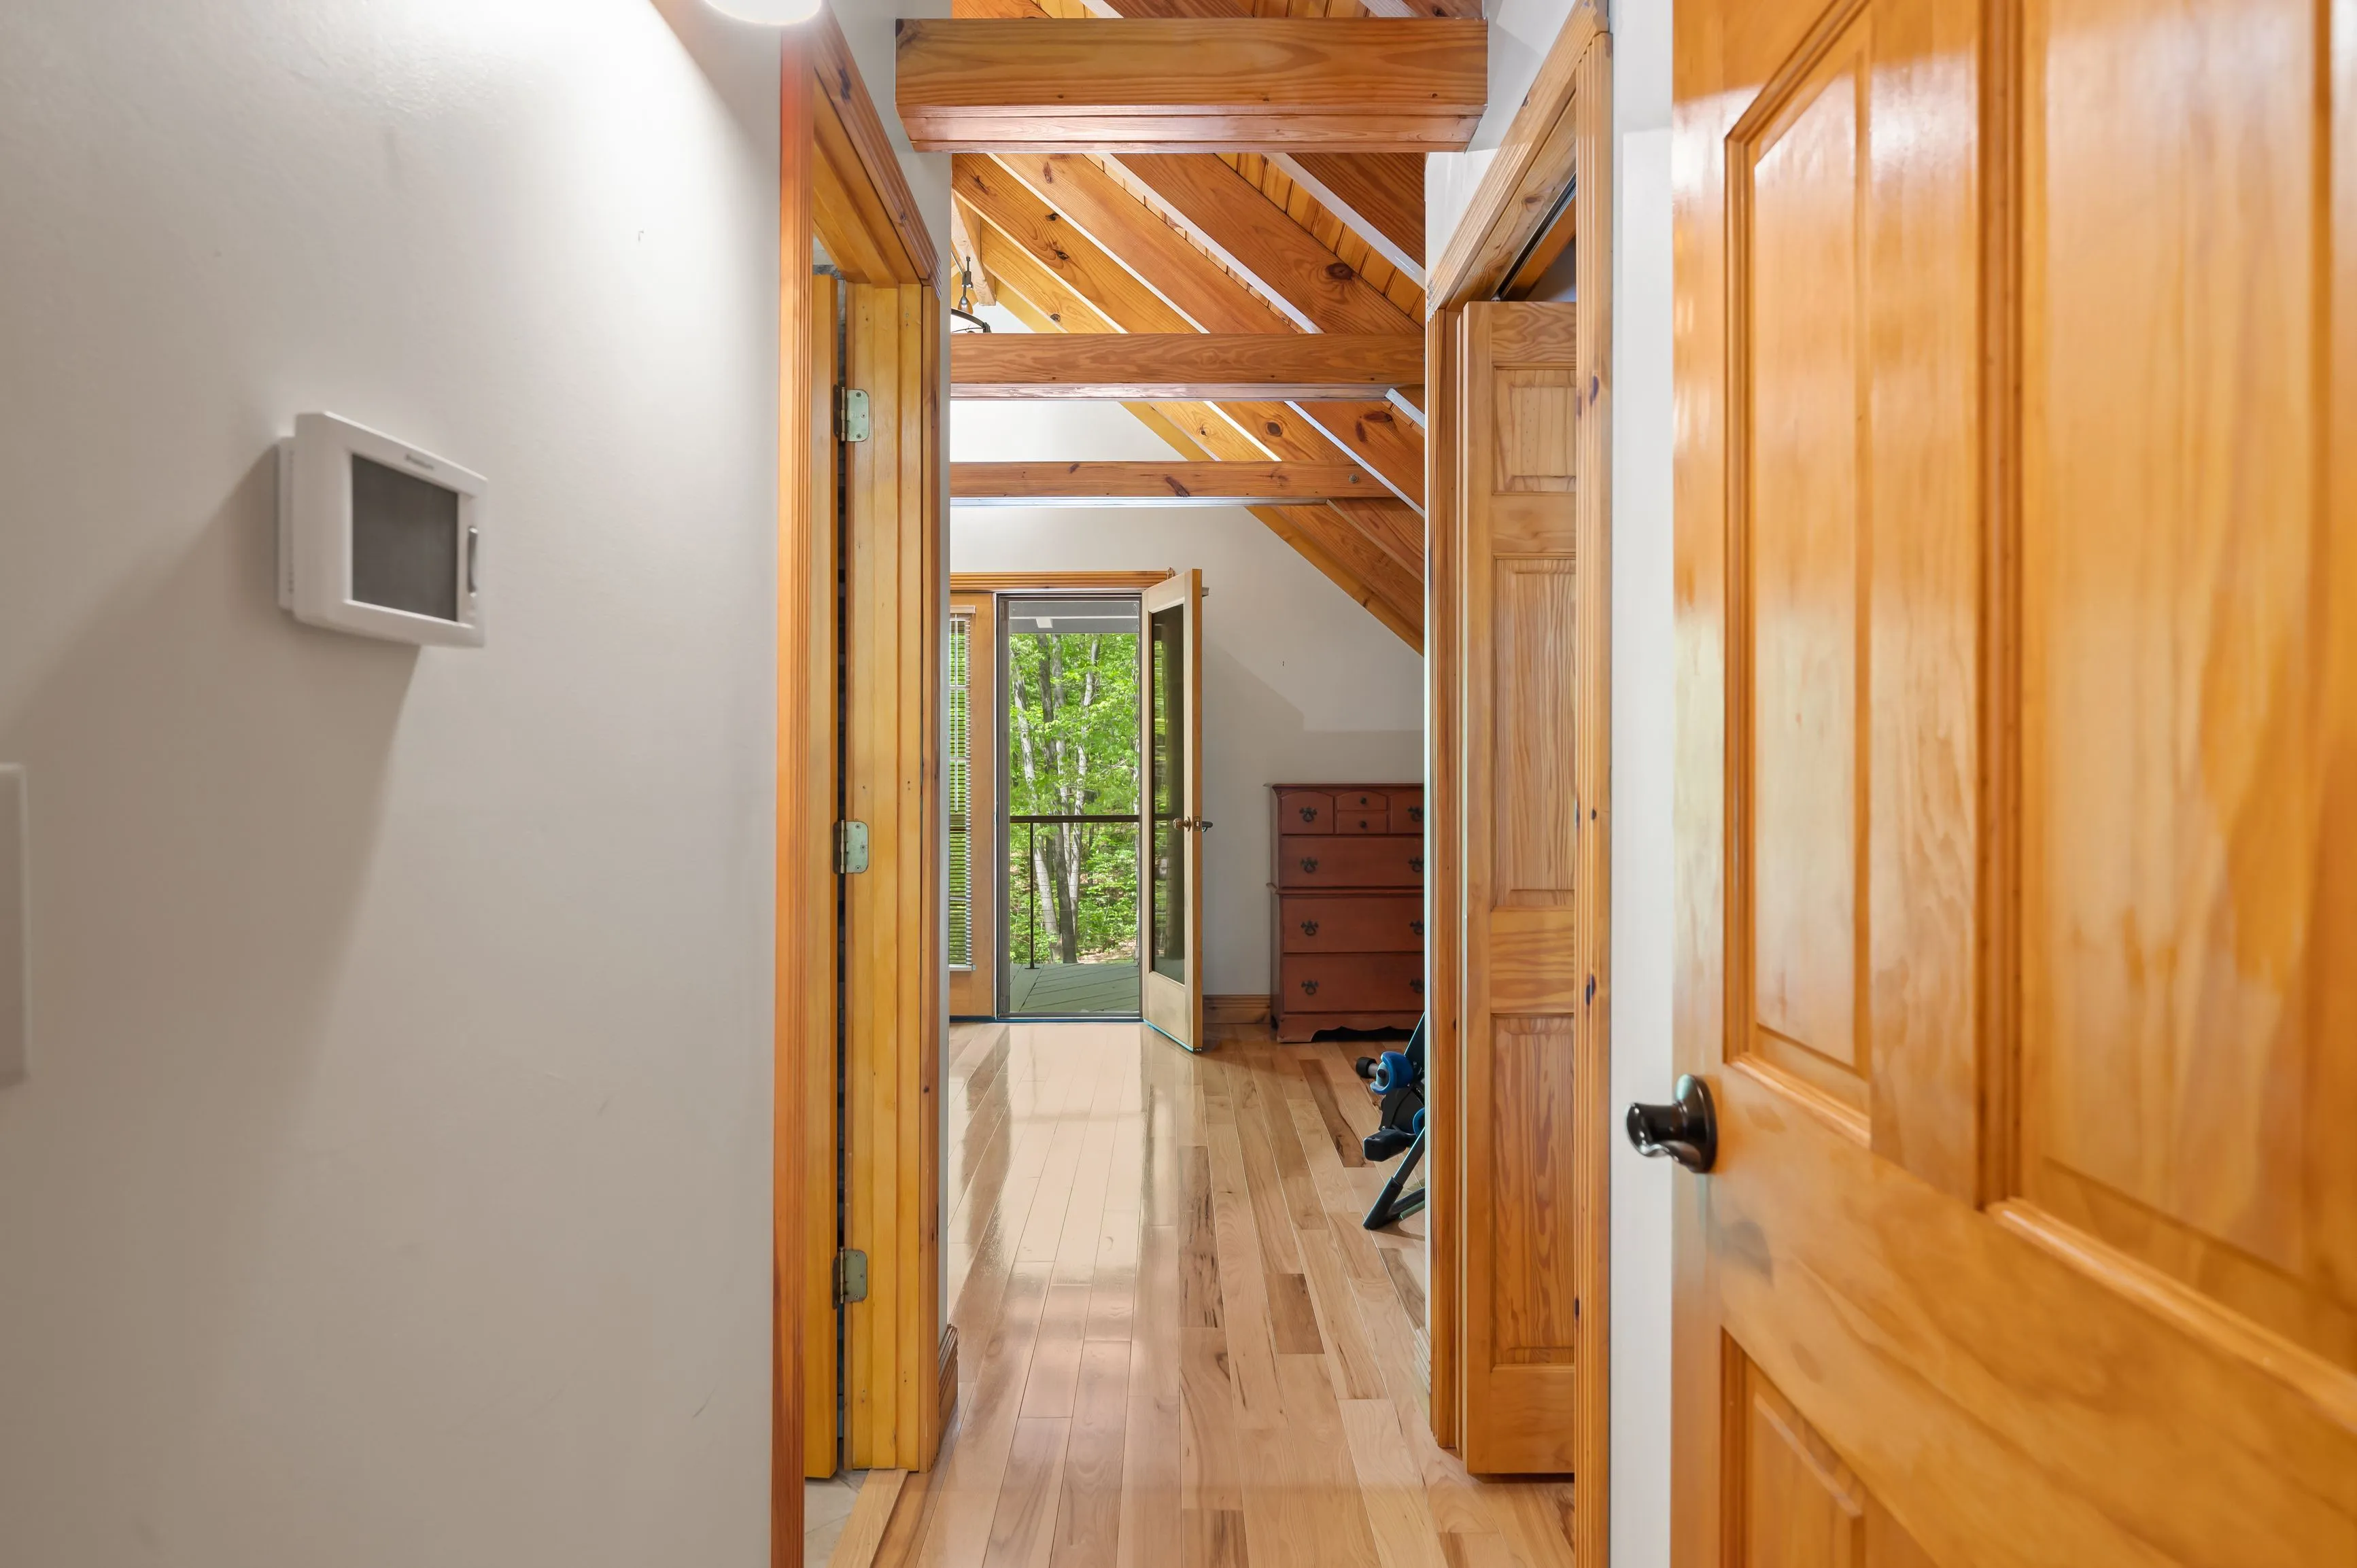 Interior view of a hallway with hardwood floors, wooden doors, and exposed wooden beams, leading towards a room with natural light.